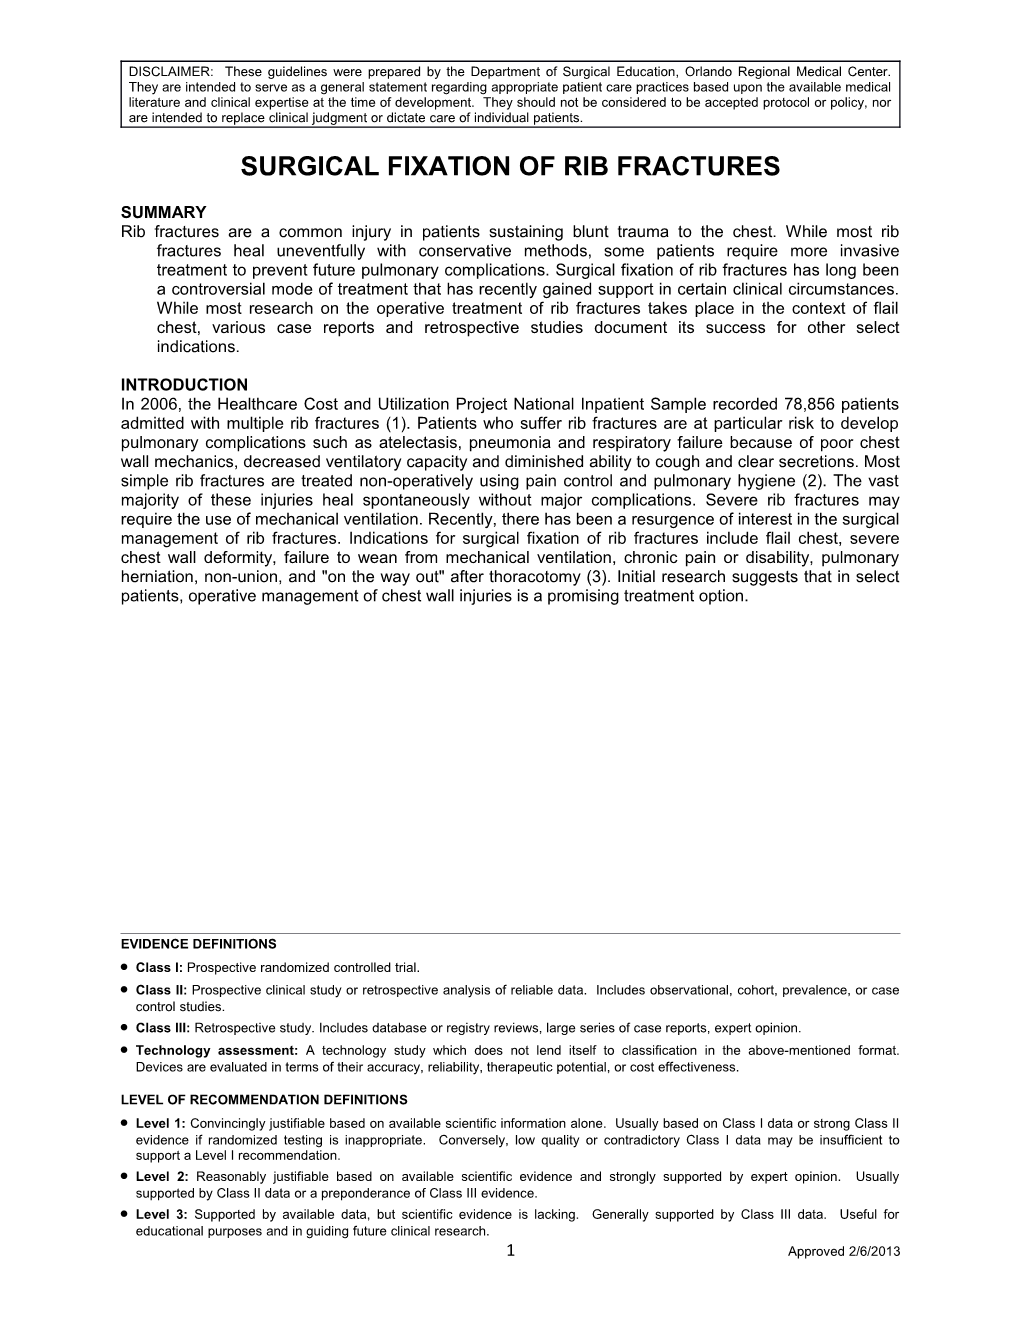 Surgical Fixation of Rib Fractures